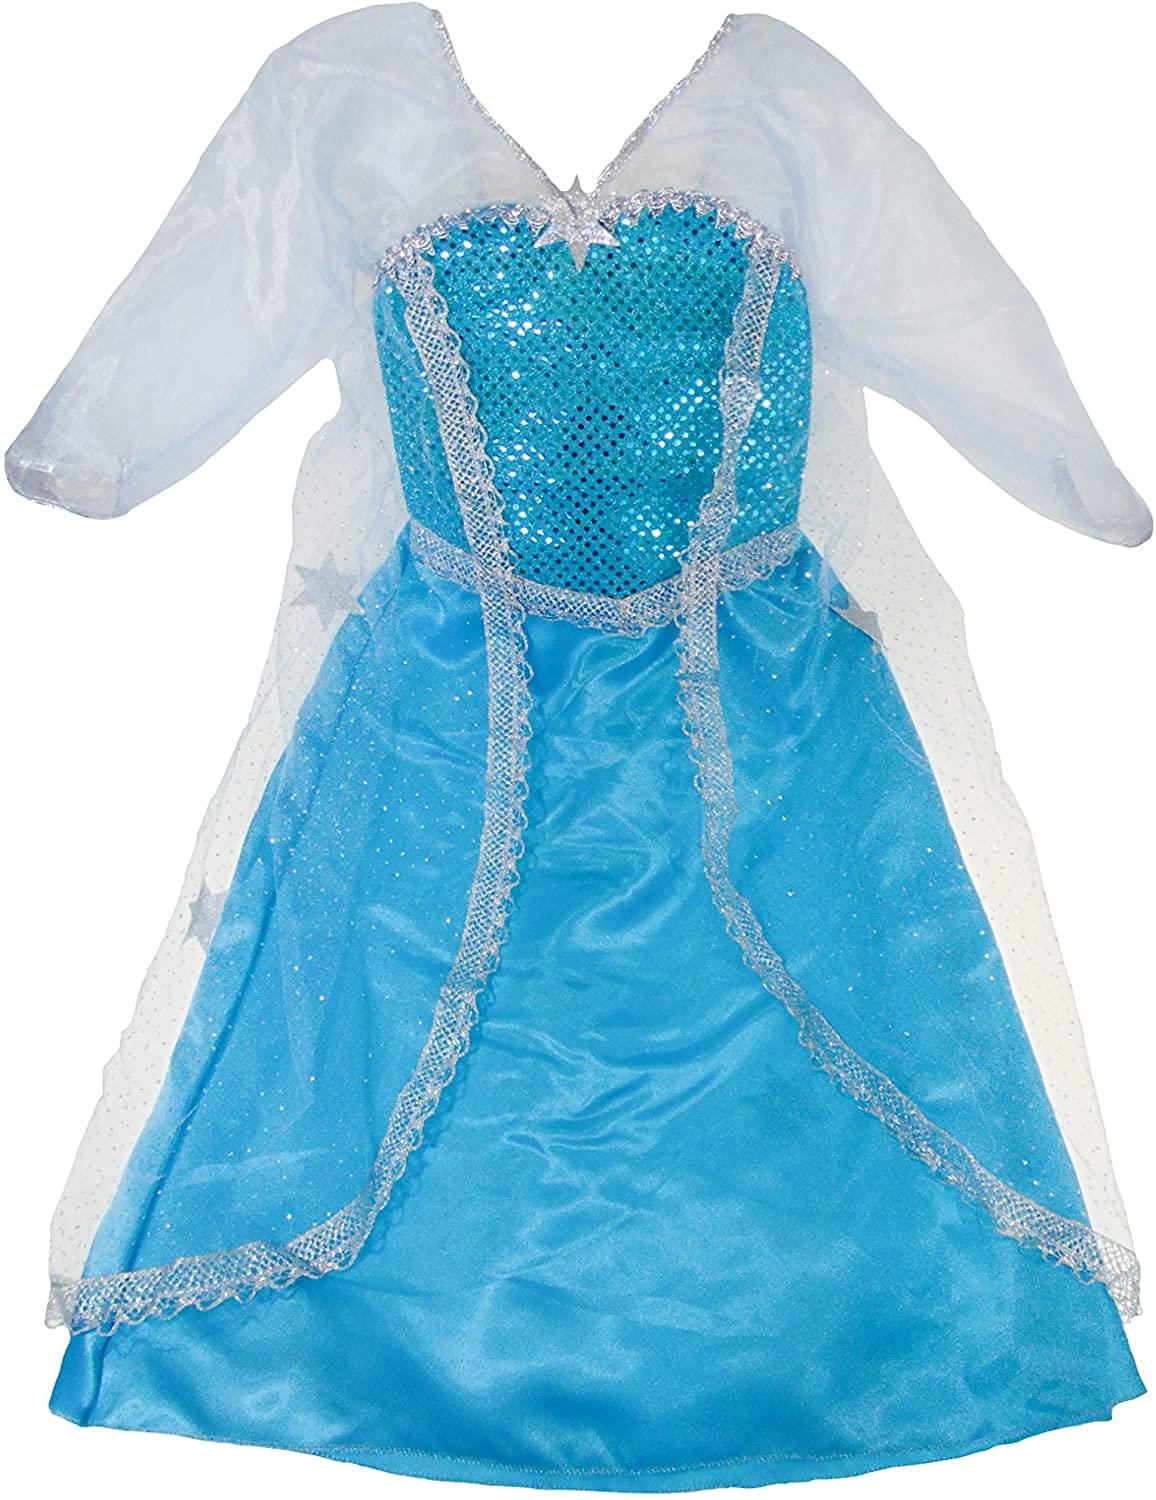 Ice Crystal Queen Child Costume